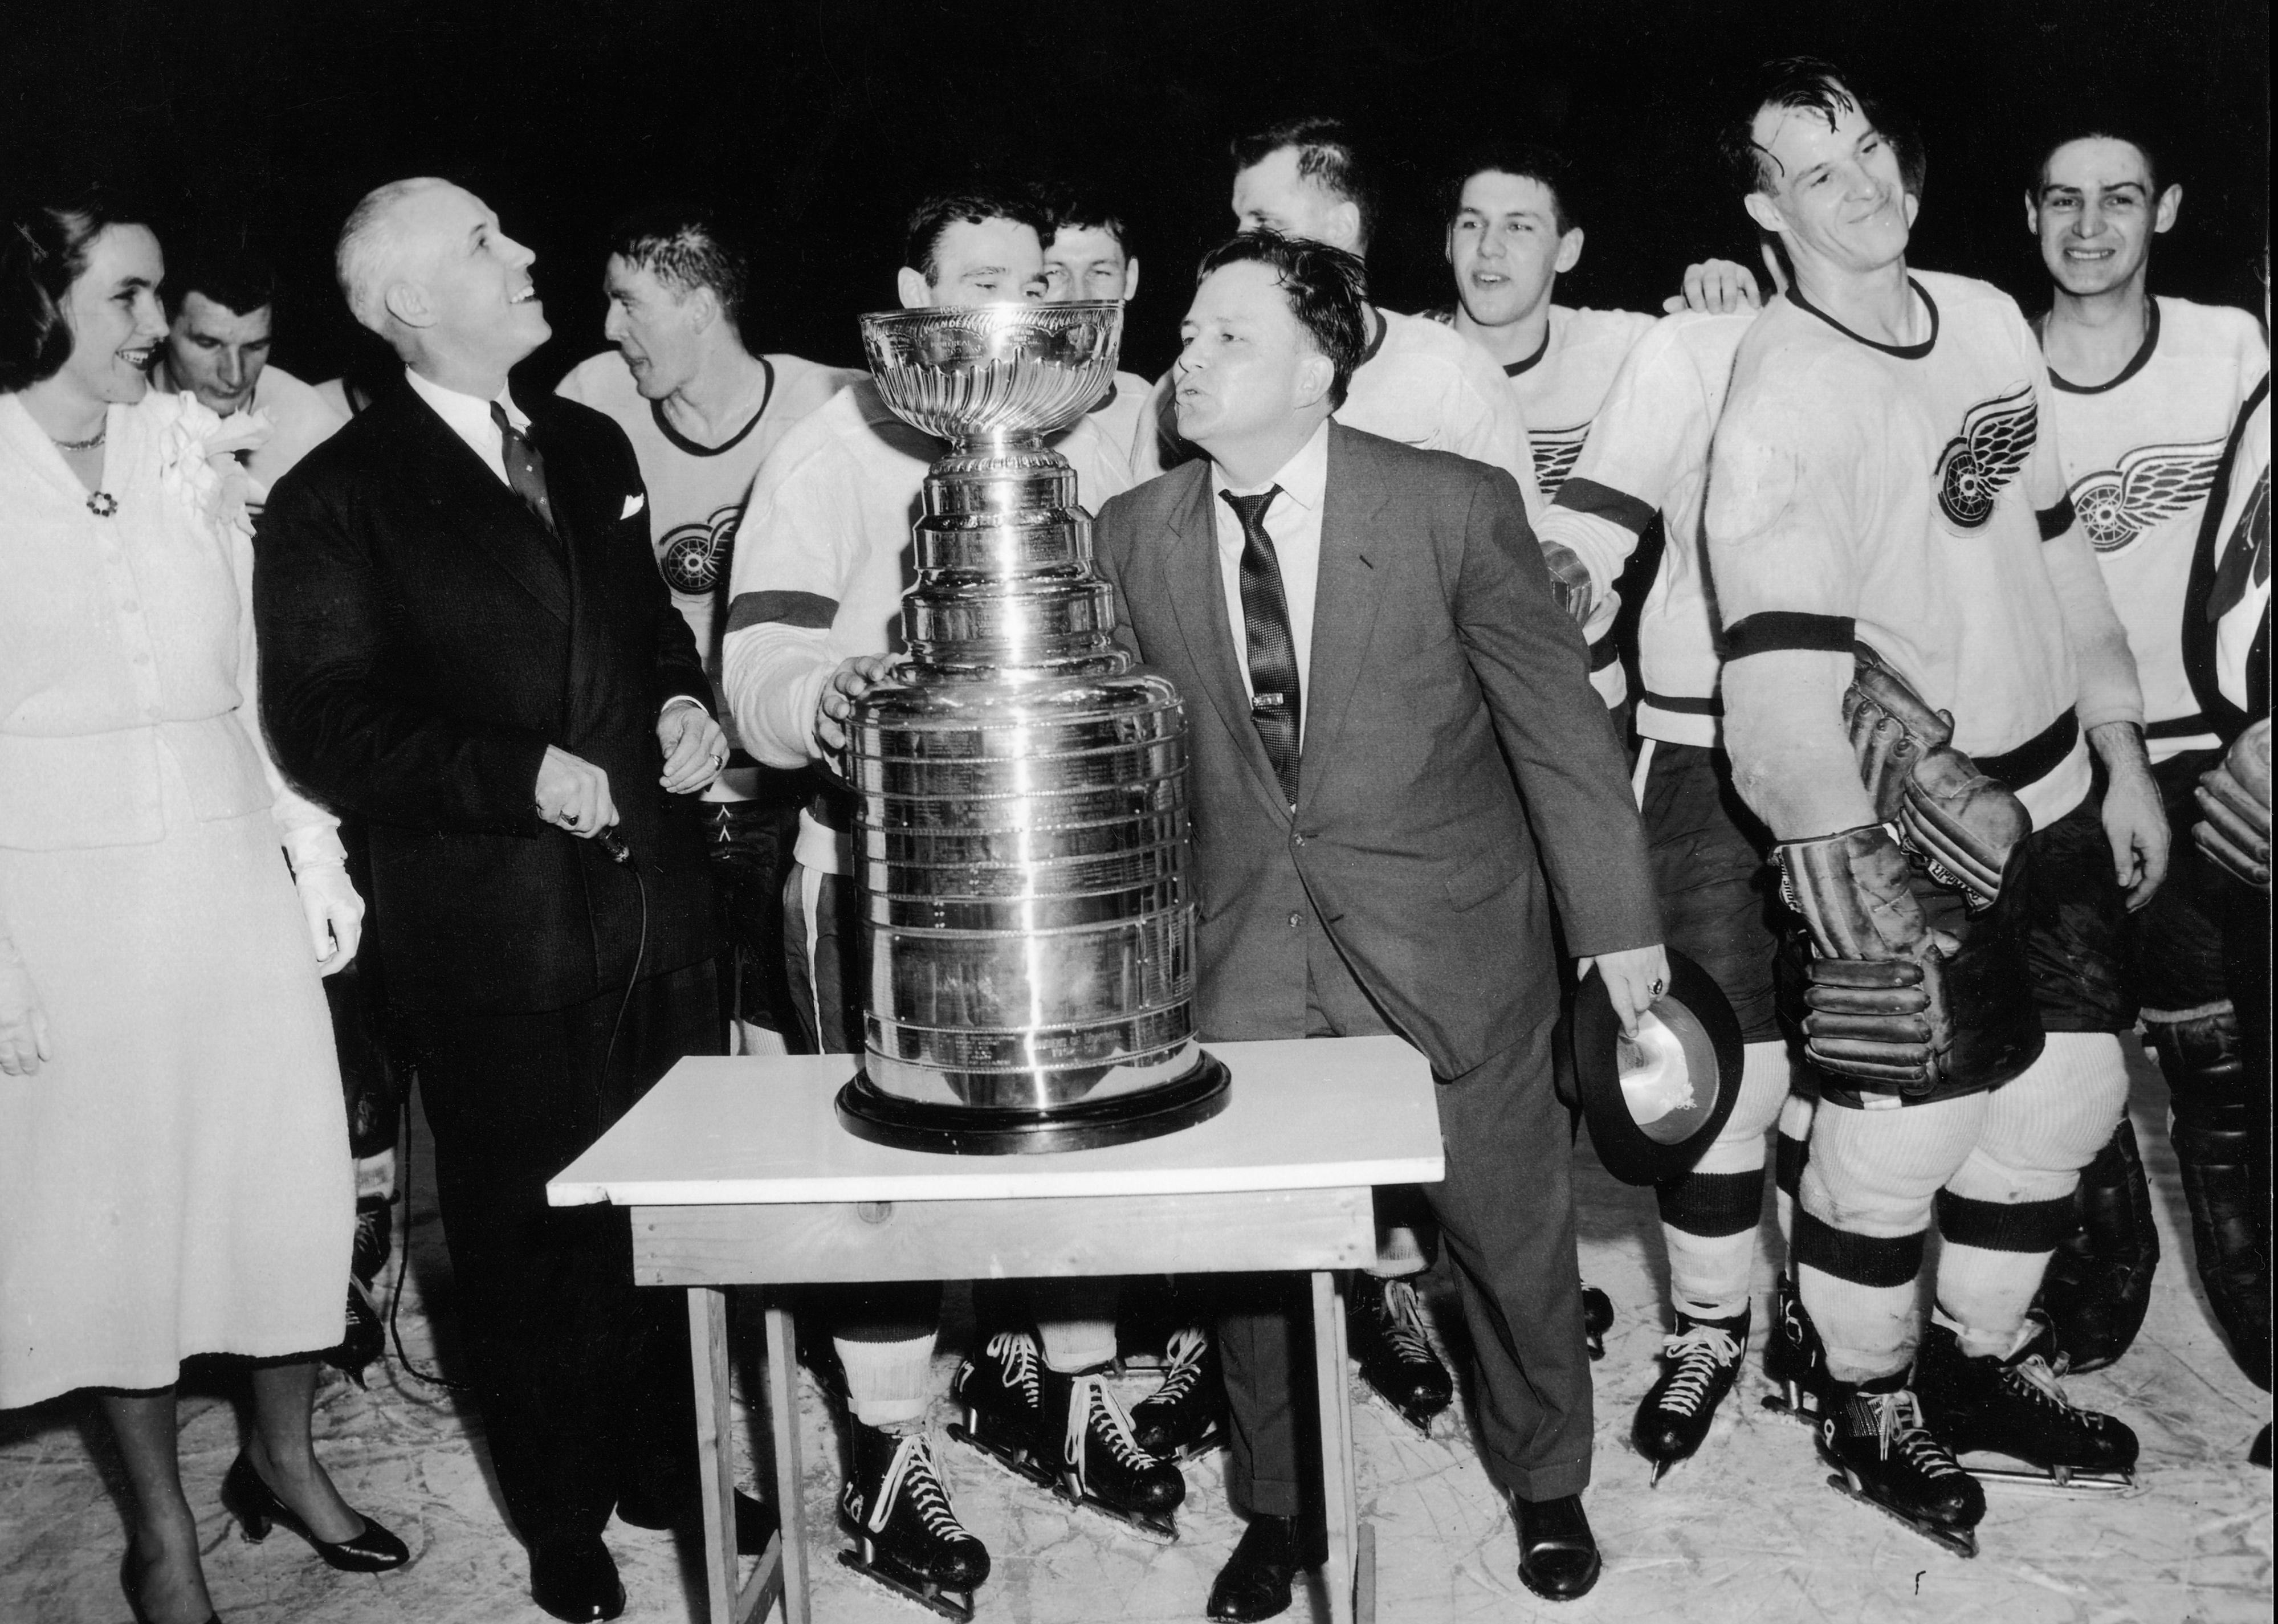 Head coach Jimmy Skinner of the Detroit Red Wings leans in to kiss the Stanley Cup trophy after his team won.